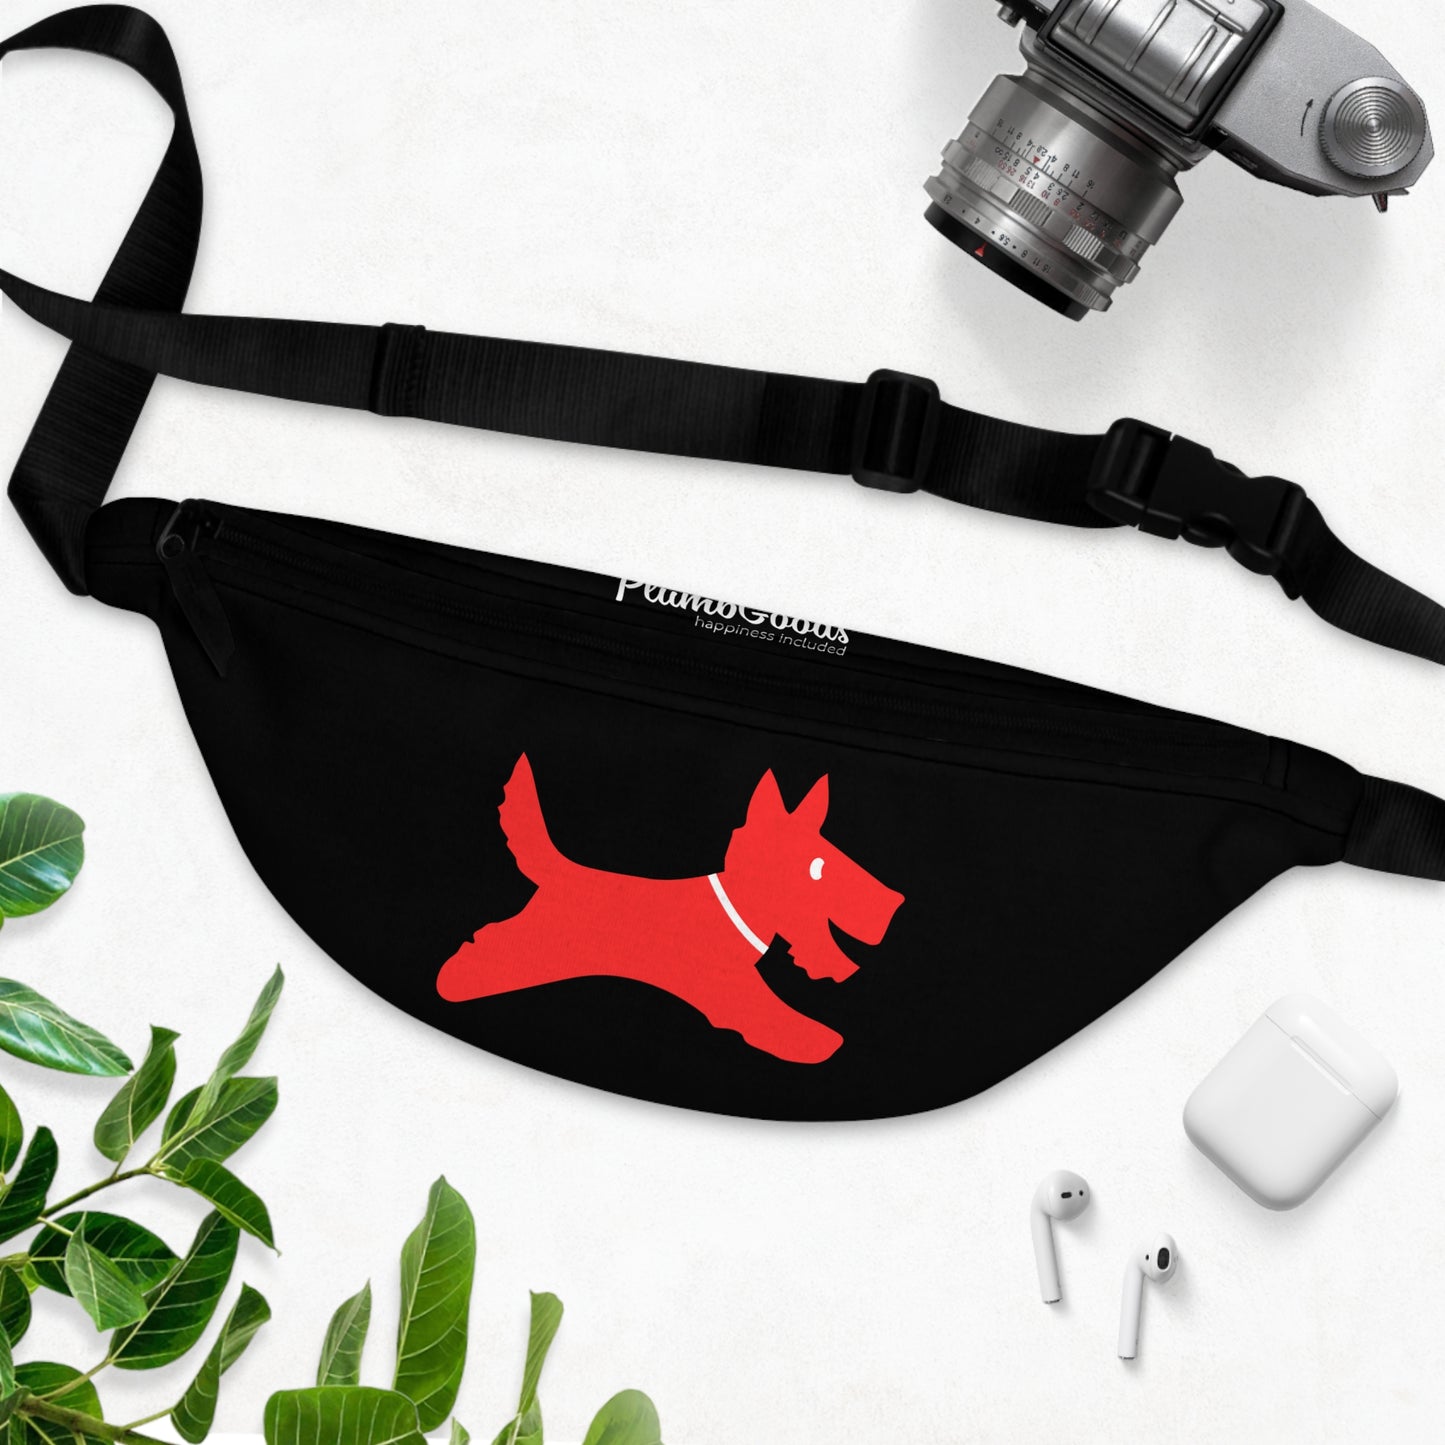 Perky Fanny Pack Black with Red Perky